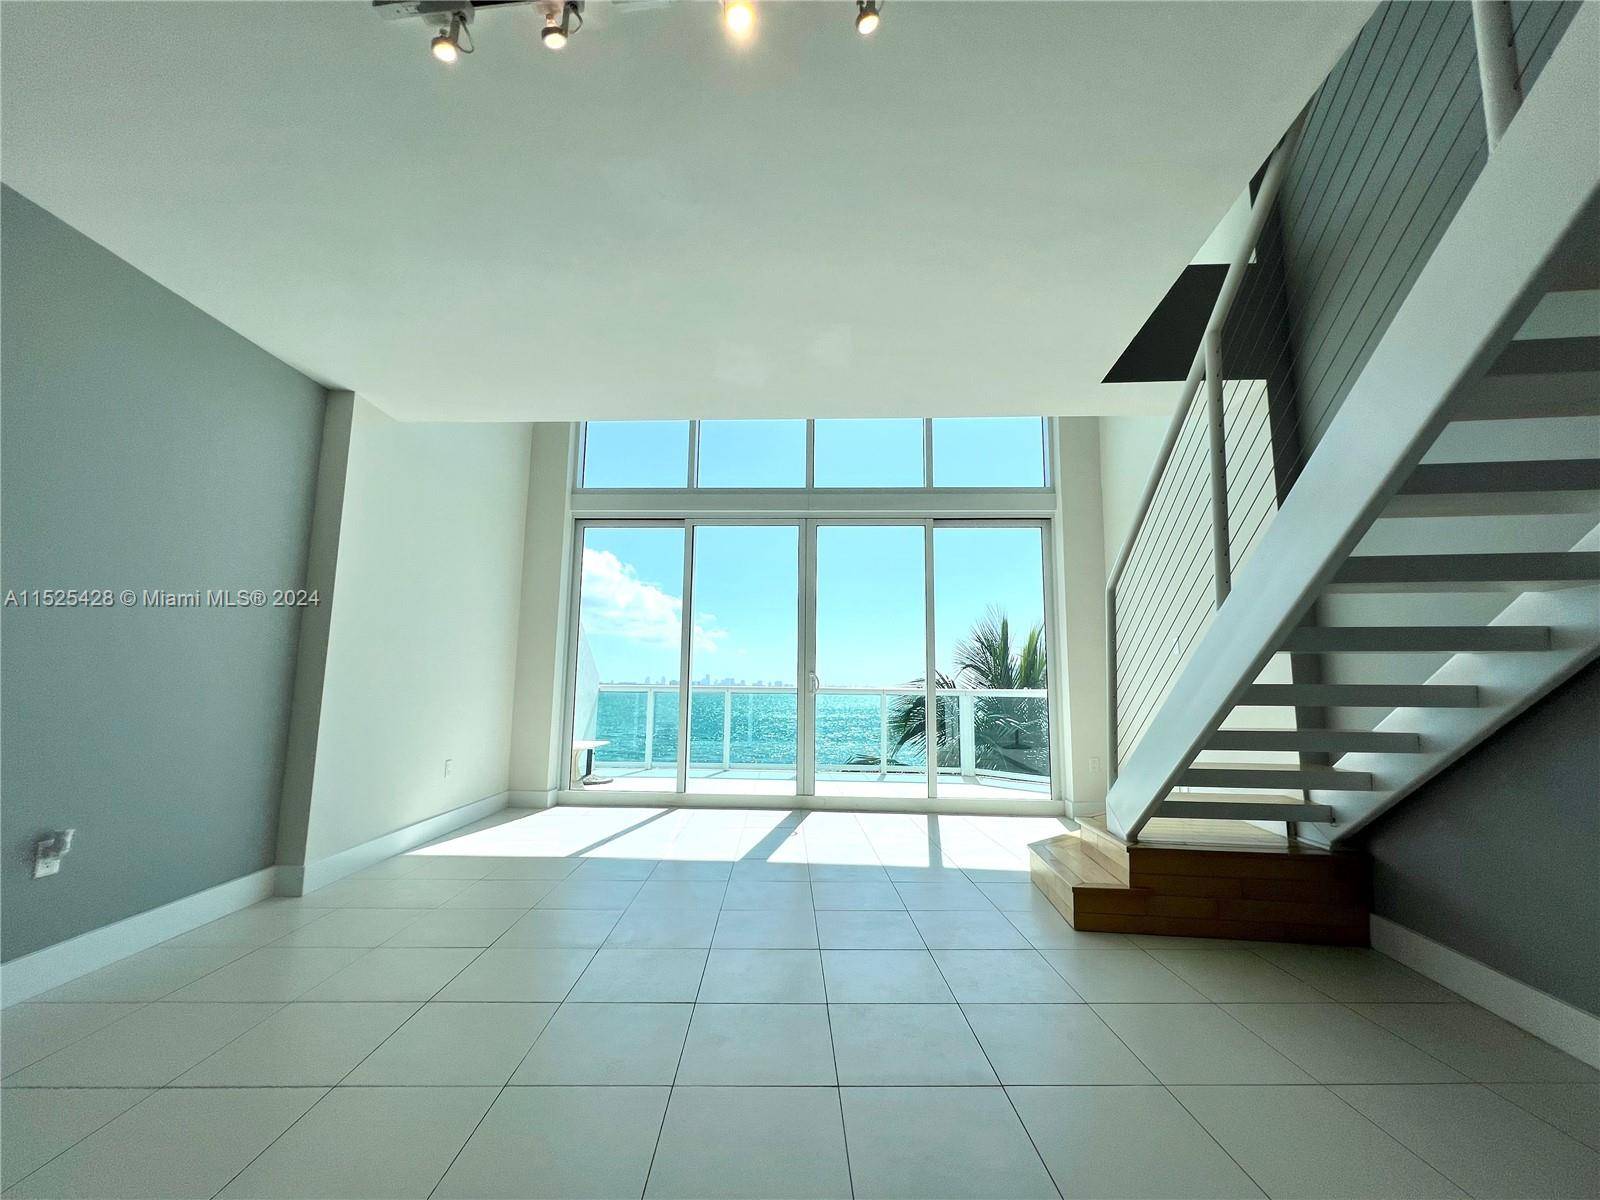 Expansive 2 Bedroom 2. 5 Bathroom waterfront two story loft with gorgeous unobstructed views.